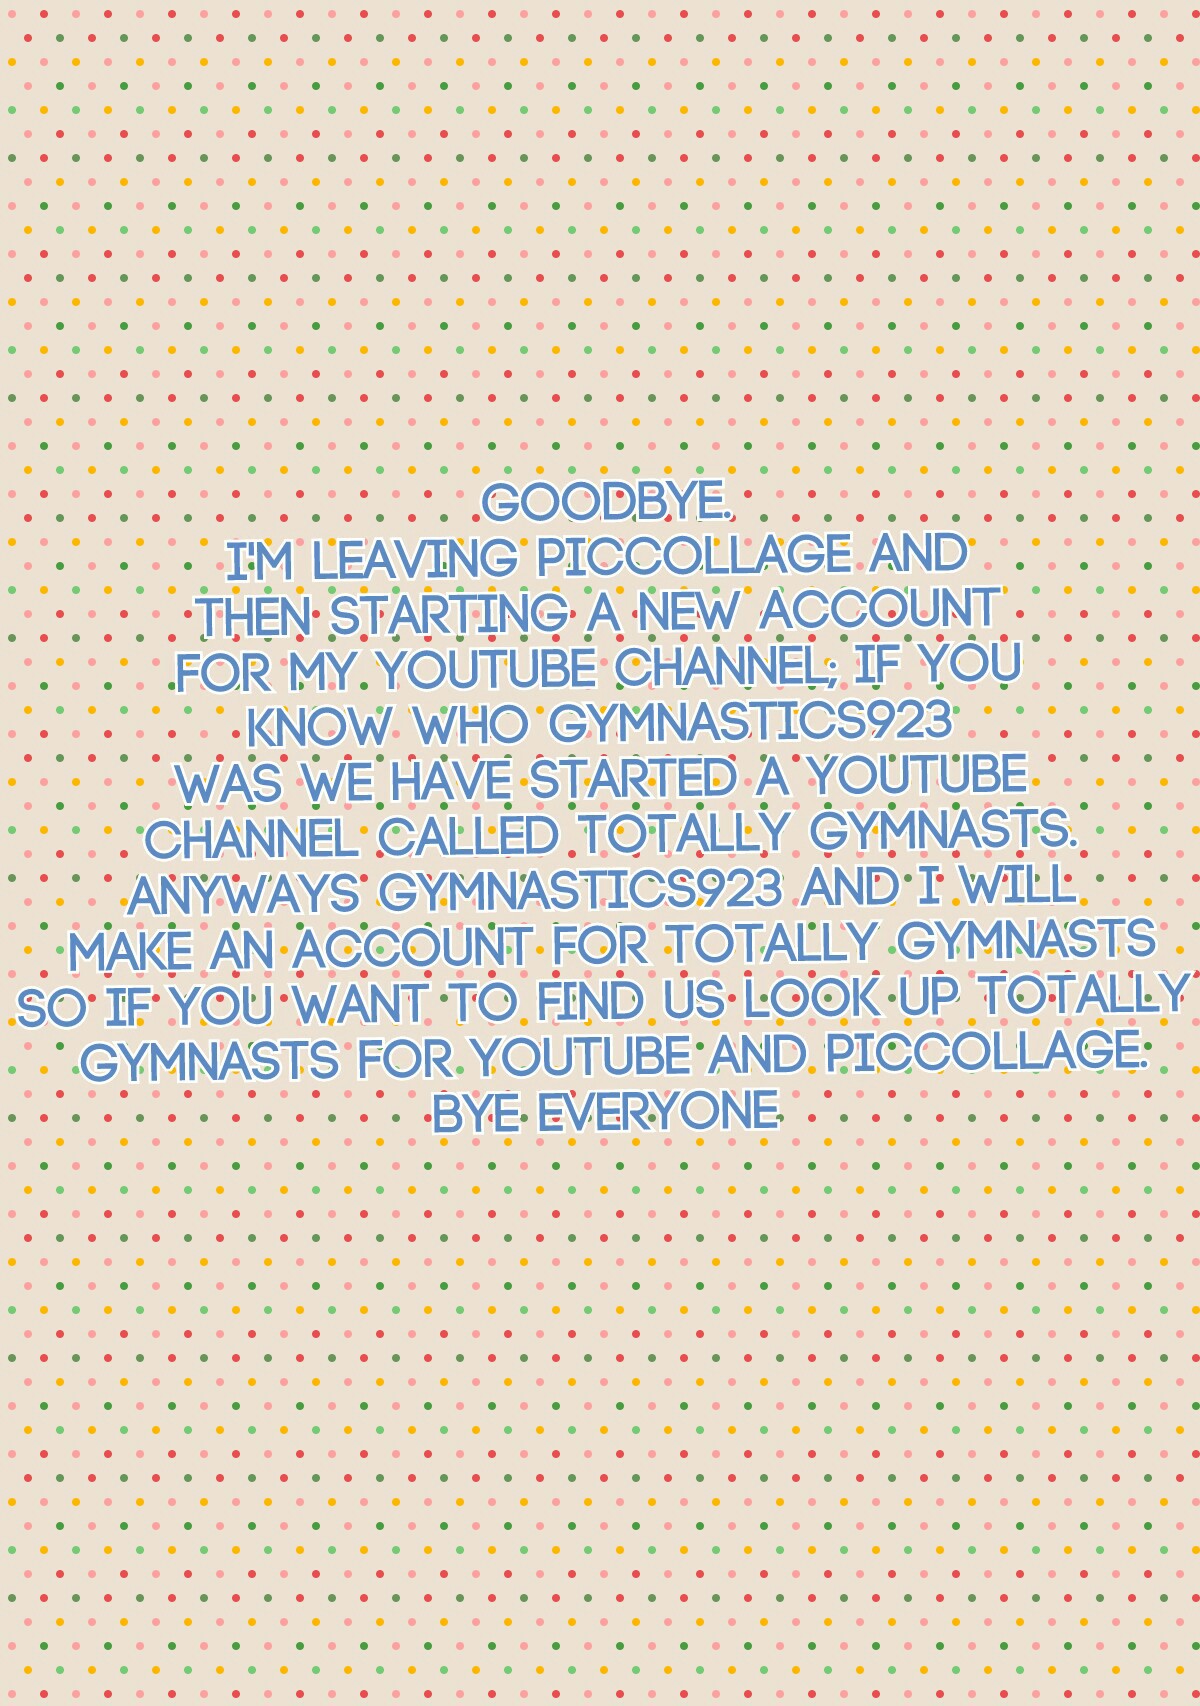 Goodbye.
I'm leaving piccollage and 
then starting a new account 
for my YouTube channel; if you 
know who Gymnastics923 
was we have started a YouTube 
channel called Totally Gymnasts.
Anyways Gymnastics923 and I will 
make an account for Totally Gymnast